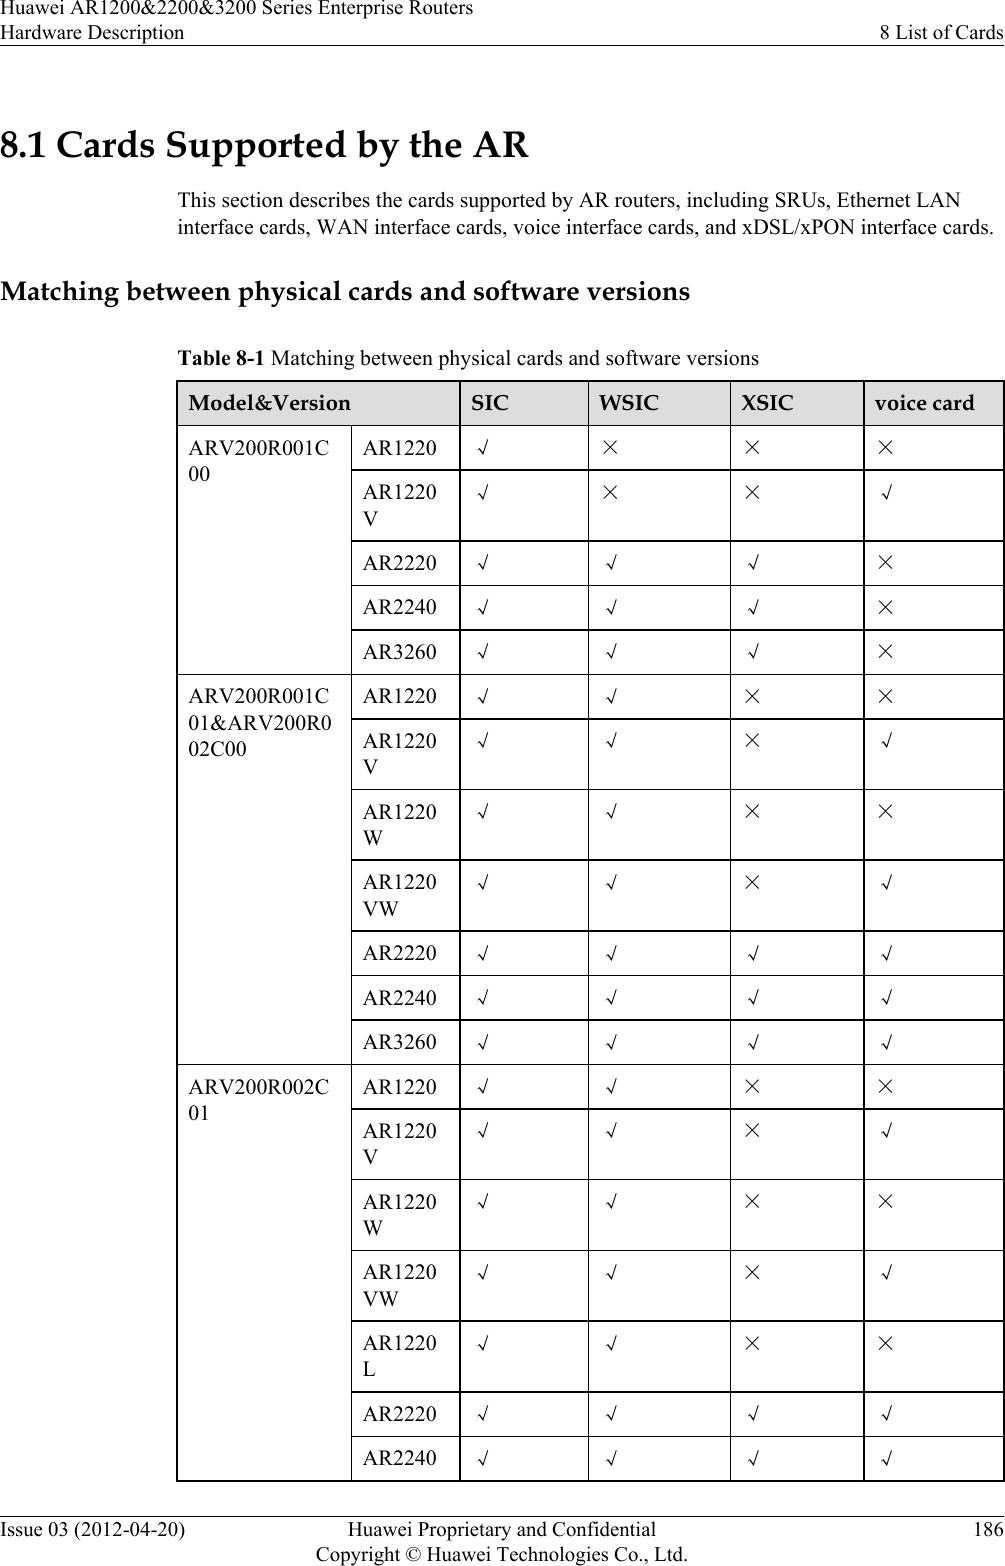 8.1 Cards Supported by the ARThis section describes the cards supported by AR routers, including SRUs, Ethernet LANinterface cards, WAN interface cards, voice interface cards, and xDSL/xPON interface cards.Matching between physical cards and software versionsTable 8-1 Matching between physical cards and software versionsModel&amp;Version SIC WSIC XSIC voice cardARV200R001C00AR1220 √ × × ×AR1220V√ × × √AR2220 √ √ √ ×AR2240 √ √ √ ×AR3260 √ √ √ ×ARV200R001C01&amp;ARV200R002C00AR1220 √ √ × ×AR1220V√ √ × √AR1220W√ √ × ×AR1220VW√ √ × √AR2220 √ √ √ √AR2240 √ √ √ √AR3260 √ √ √ √ARV200R002C01AR1220 √ √ × ×AR1220V√ √ × √AR1220W√ √ × ×AR1220VW√ √ × √AR1220L√ √ × ×AR2220 √ √ √ √AR2240 √ √ √ √Huawei AR1200&amp;2200&amp;3200 Series Enterprise RoutersHardware Description 8 List of CardsIssue 03 (2012-04-20) Huawei Proprietary and ConfidentialCopyright © Huawei Technologies Co., Ltd.186